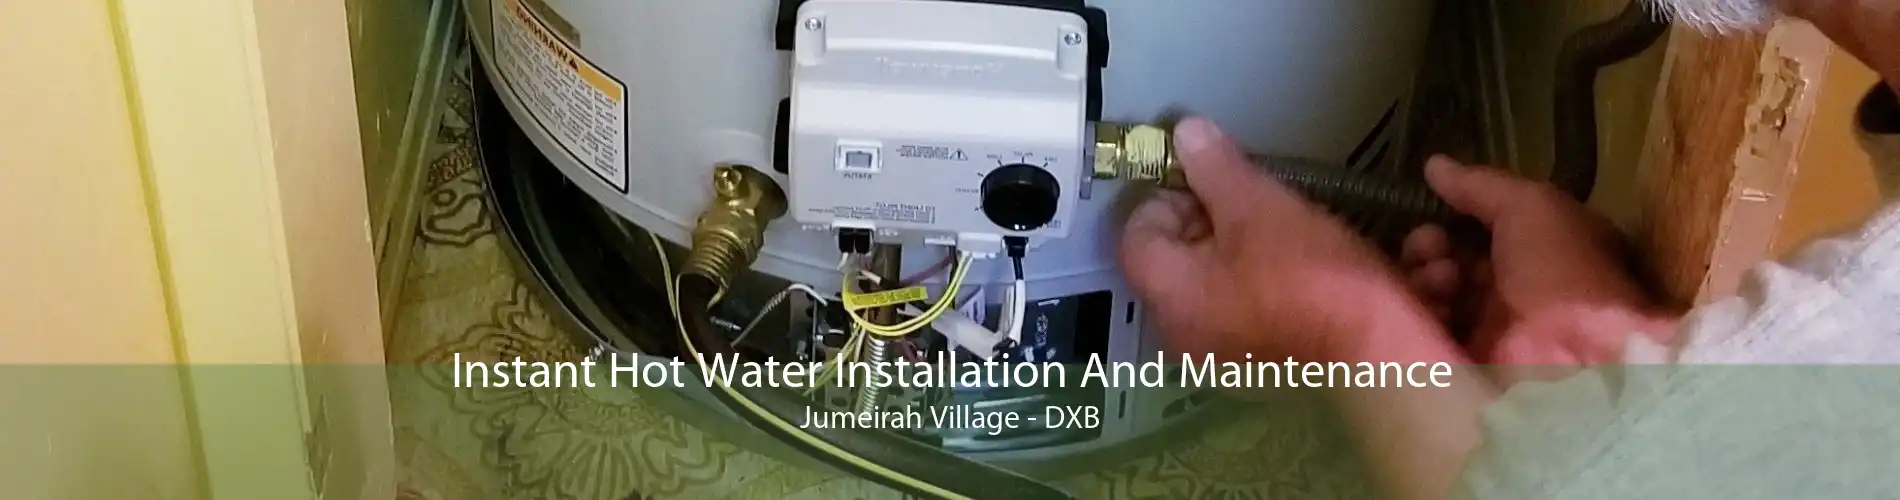 Instant Hot Water Installation And Maintenance Jumeirah Village - DXB